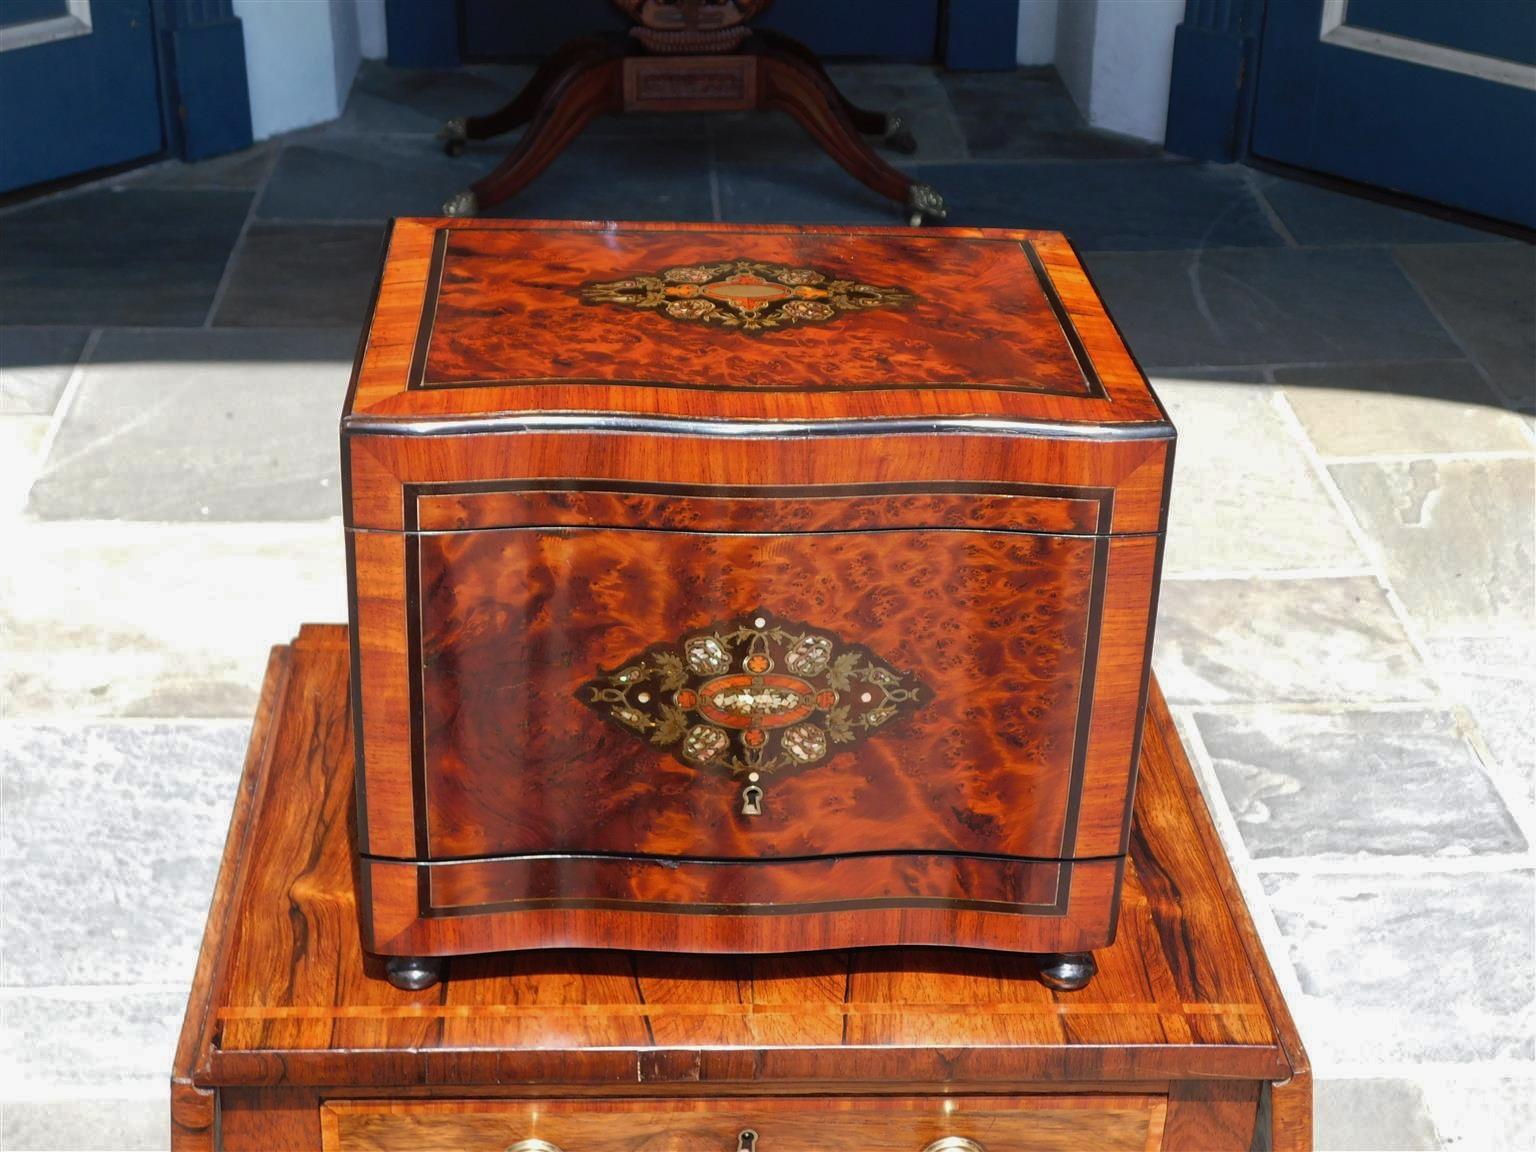 French burl walnut ebony, brass, and mother of pearl inlaid Tantalus with hinged folding top, flanking hinged sides, cross banded tulip wood, original locking mechanism with key, fitted interior with gilt crystal bar ware carrier, and resting on the